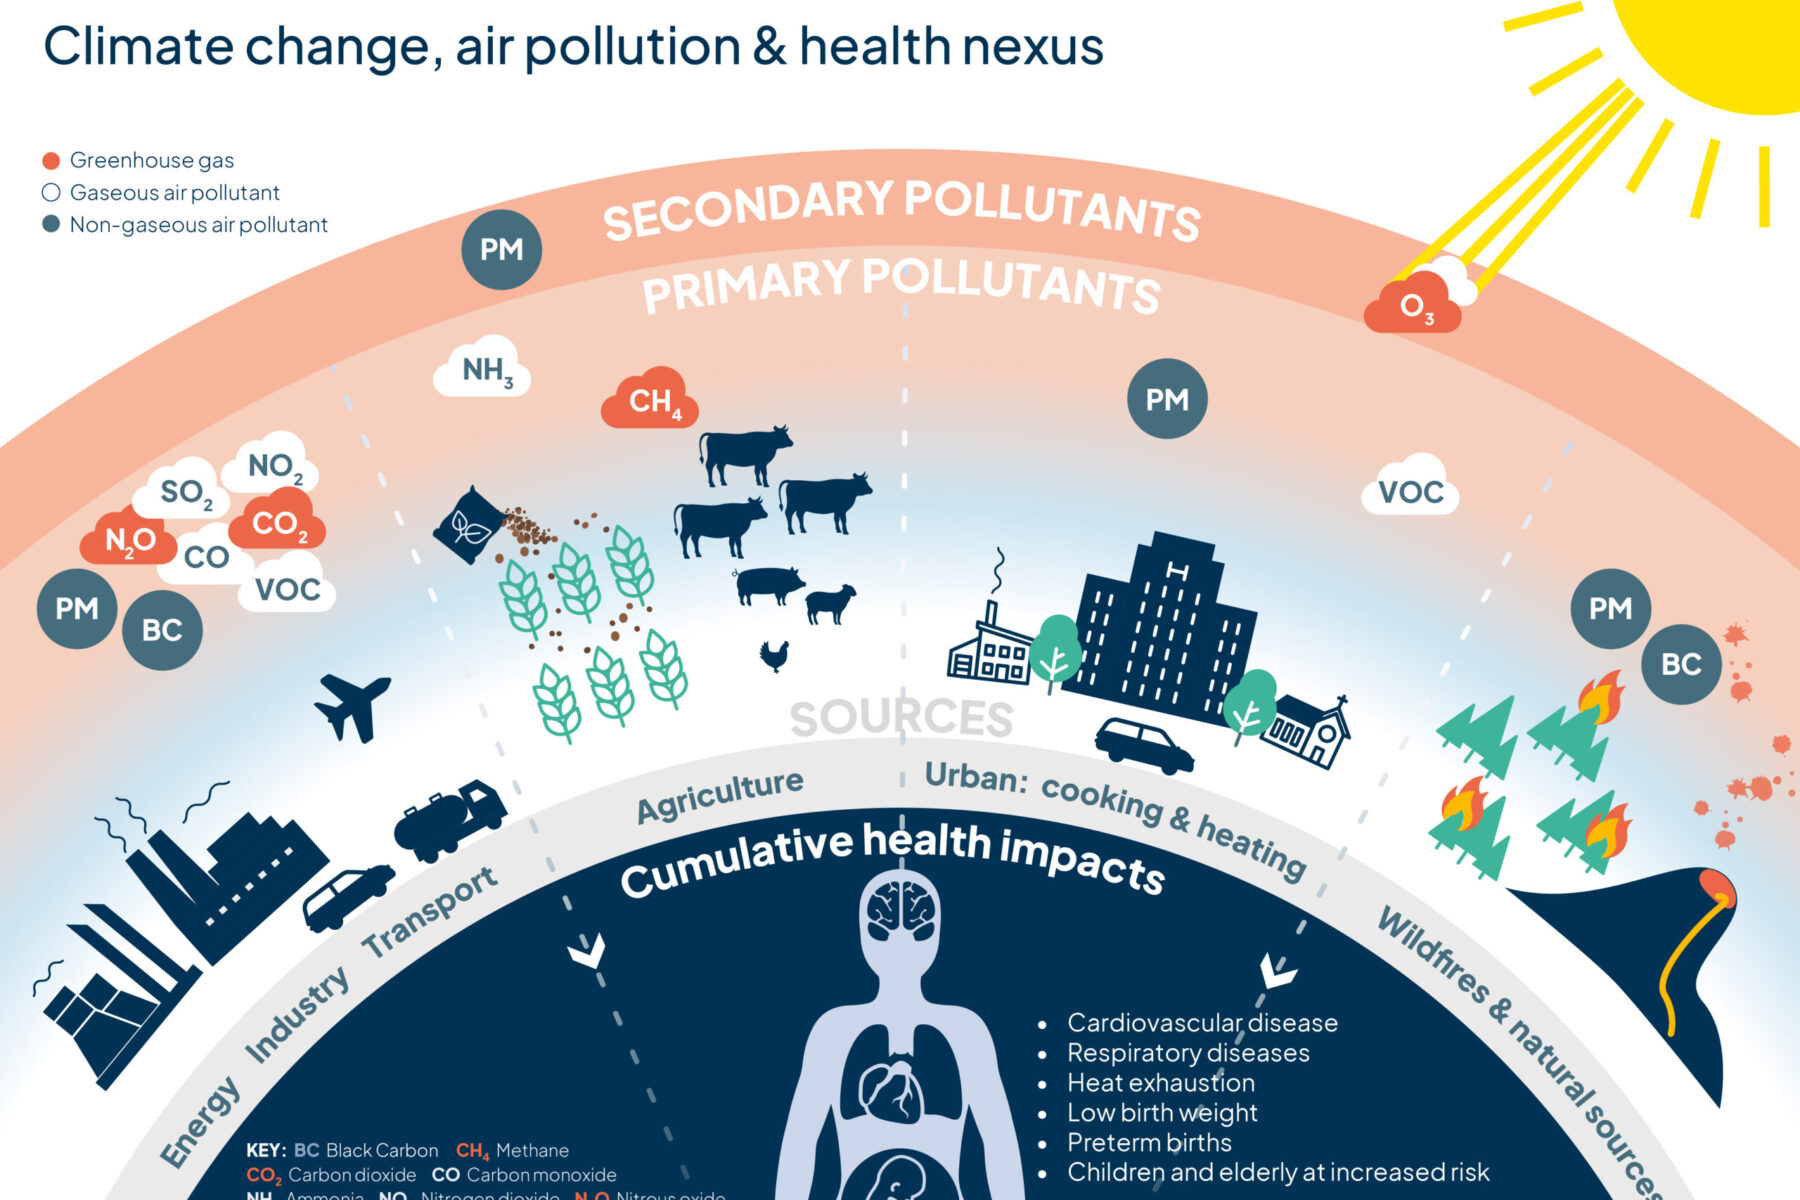 Image of Climate change, air pollution and health nexus